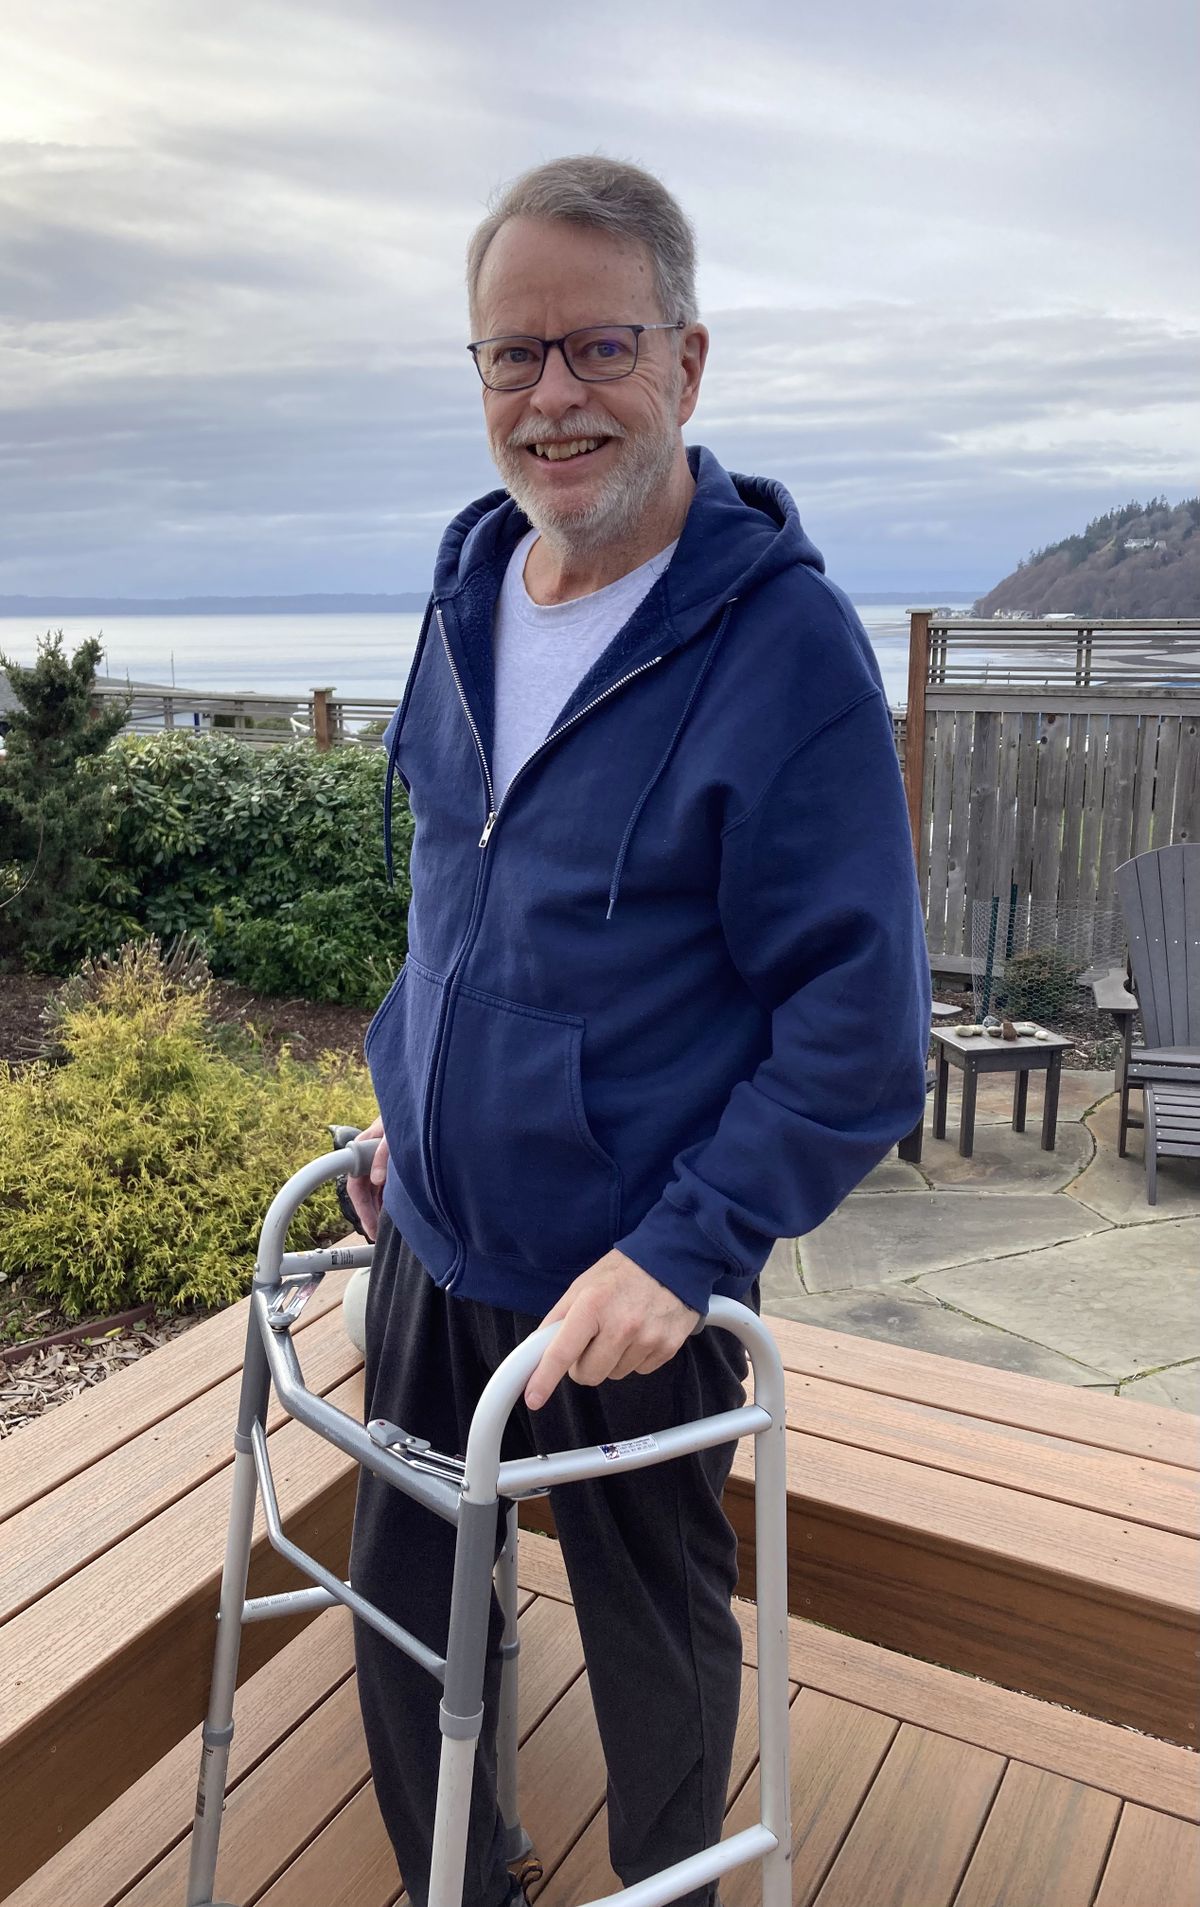 Matt Durham continues recovery at home in western Washington after receiving “the best care in Washington” with Providence. (Courtesy Providence)